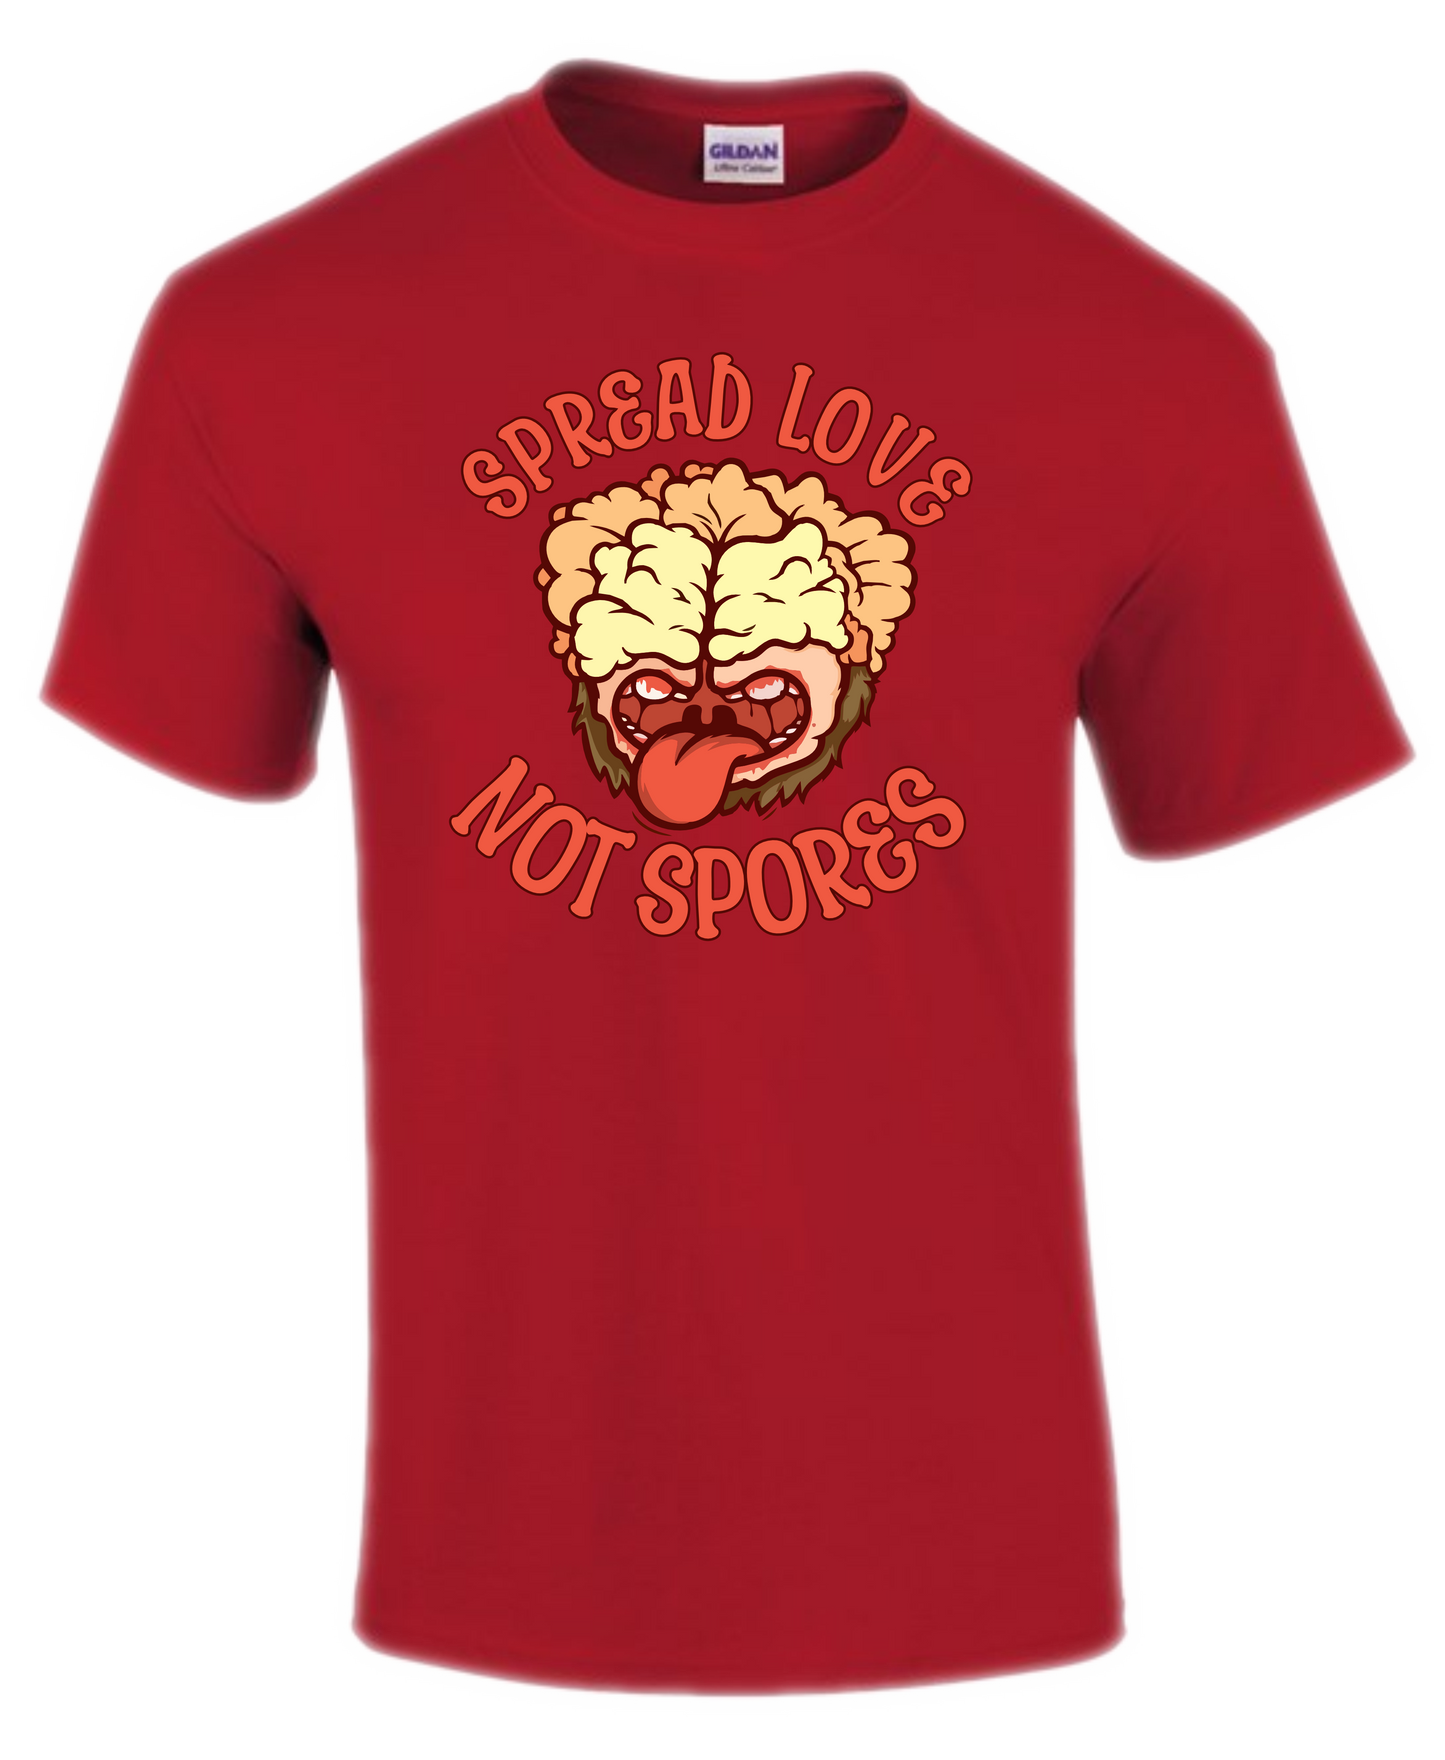 Spread Love Not Spores Printed T-Shirt